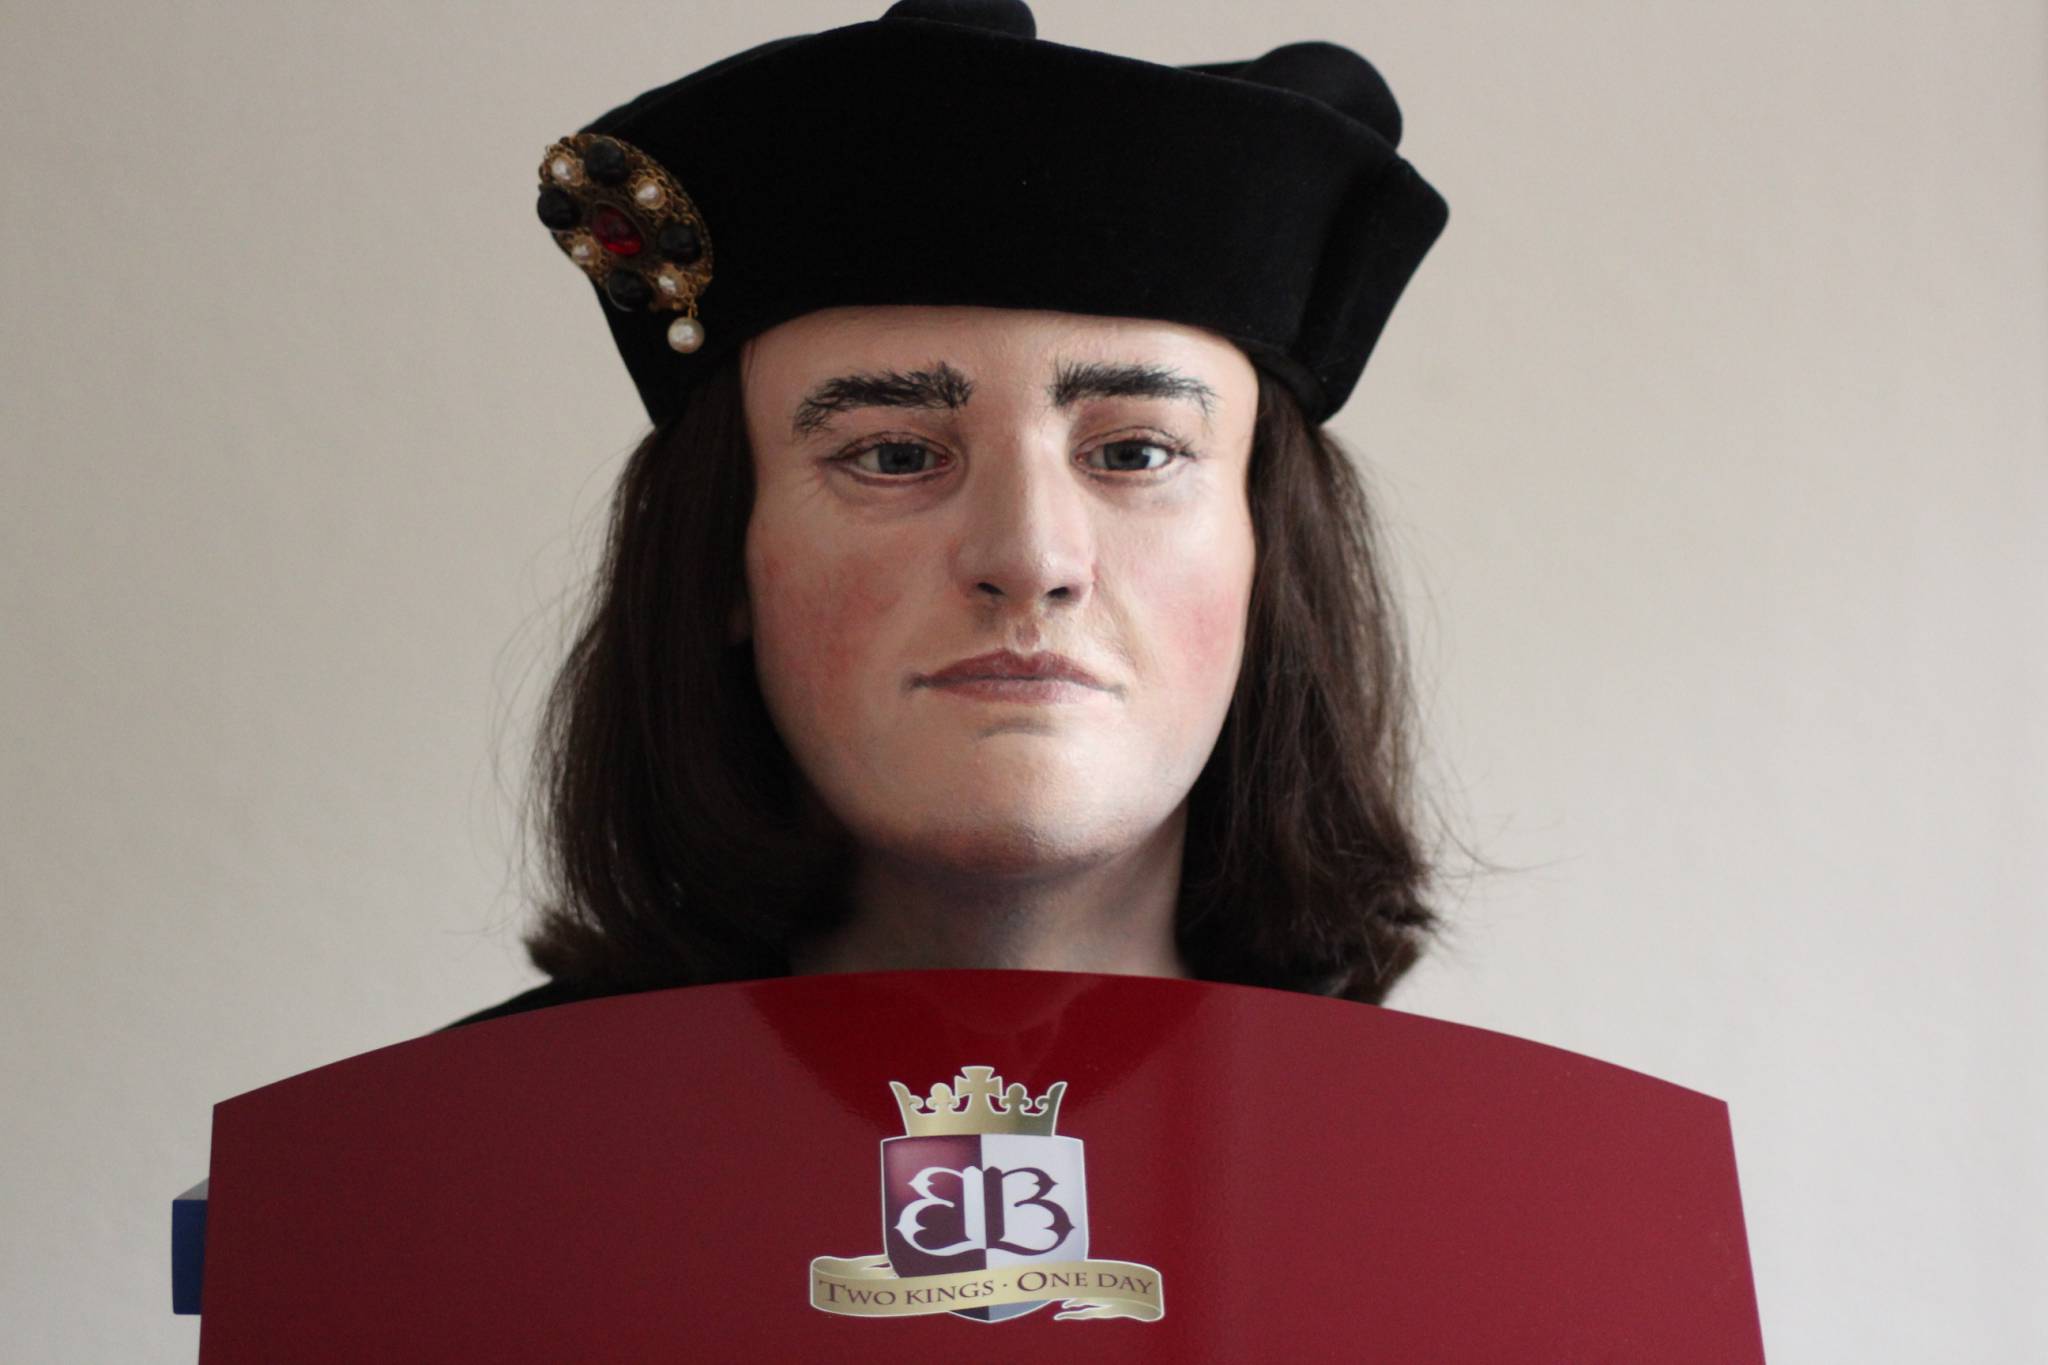 "In the Footsteps of Richard III" Guided Walk